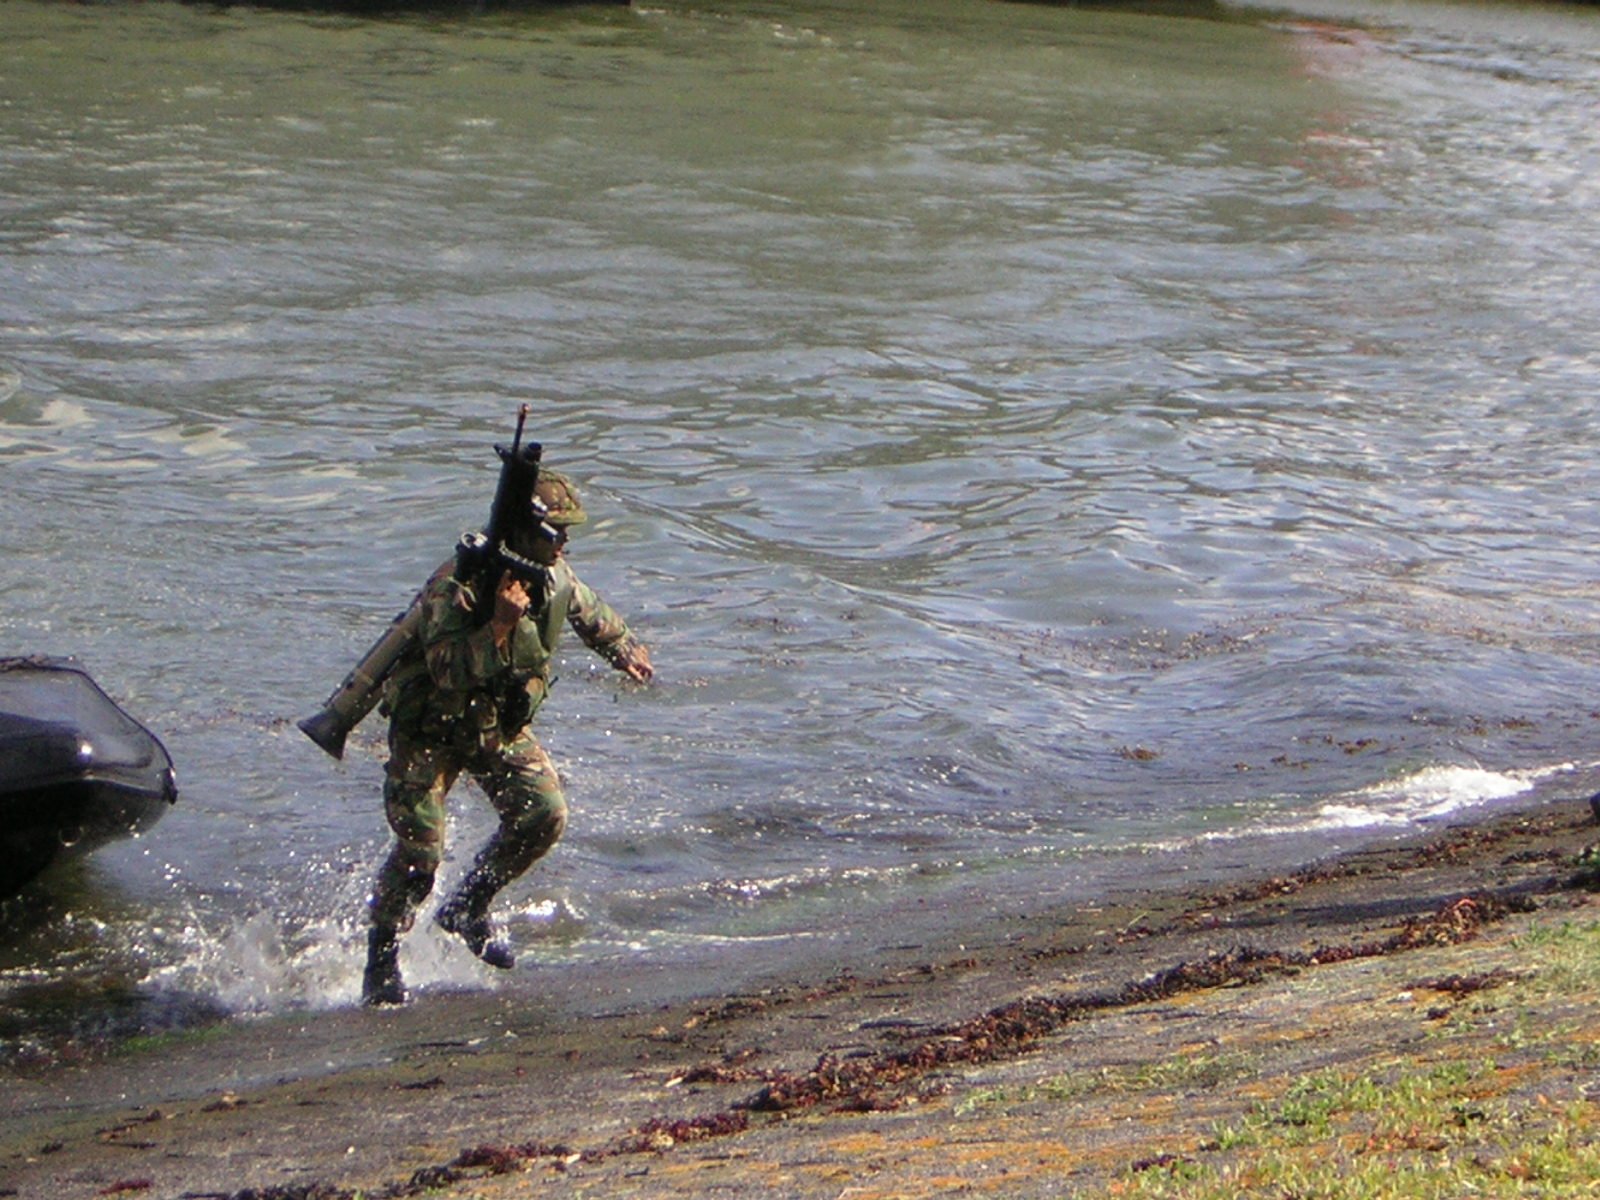 a soldier splashing through the water with a rifle